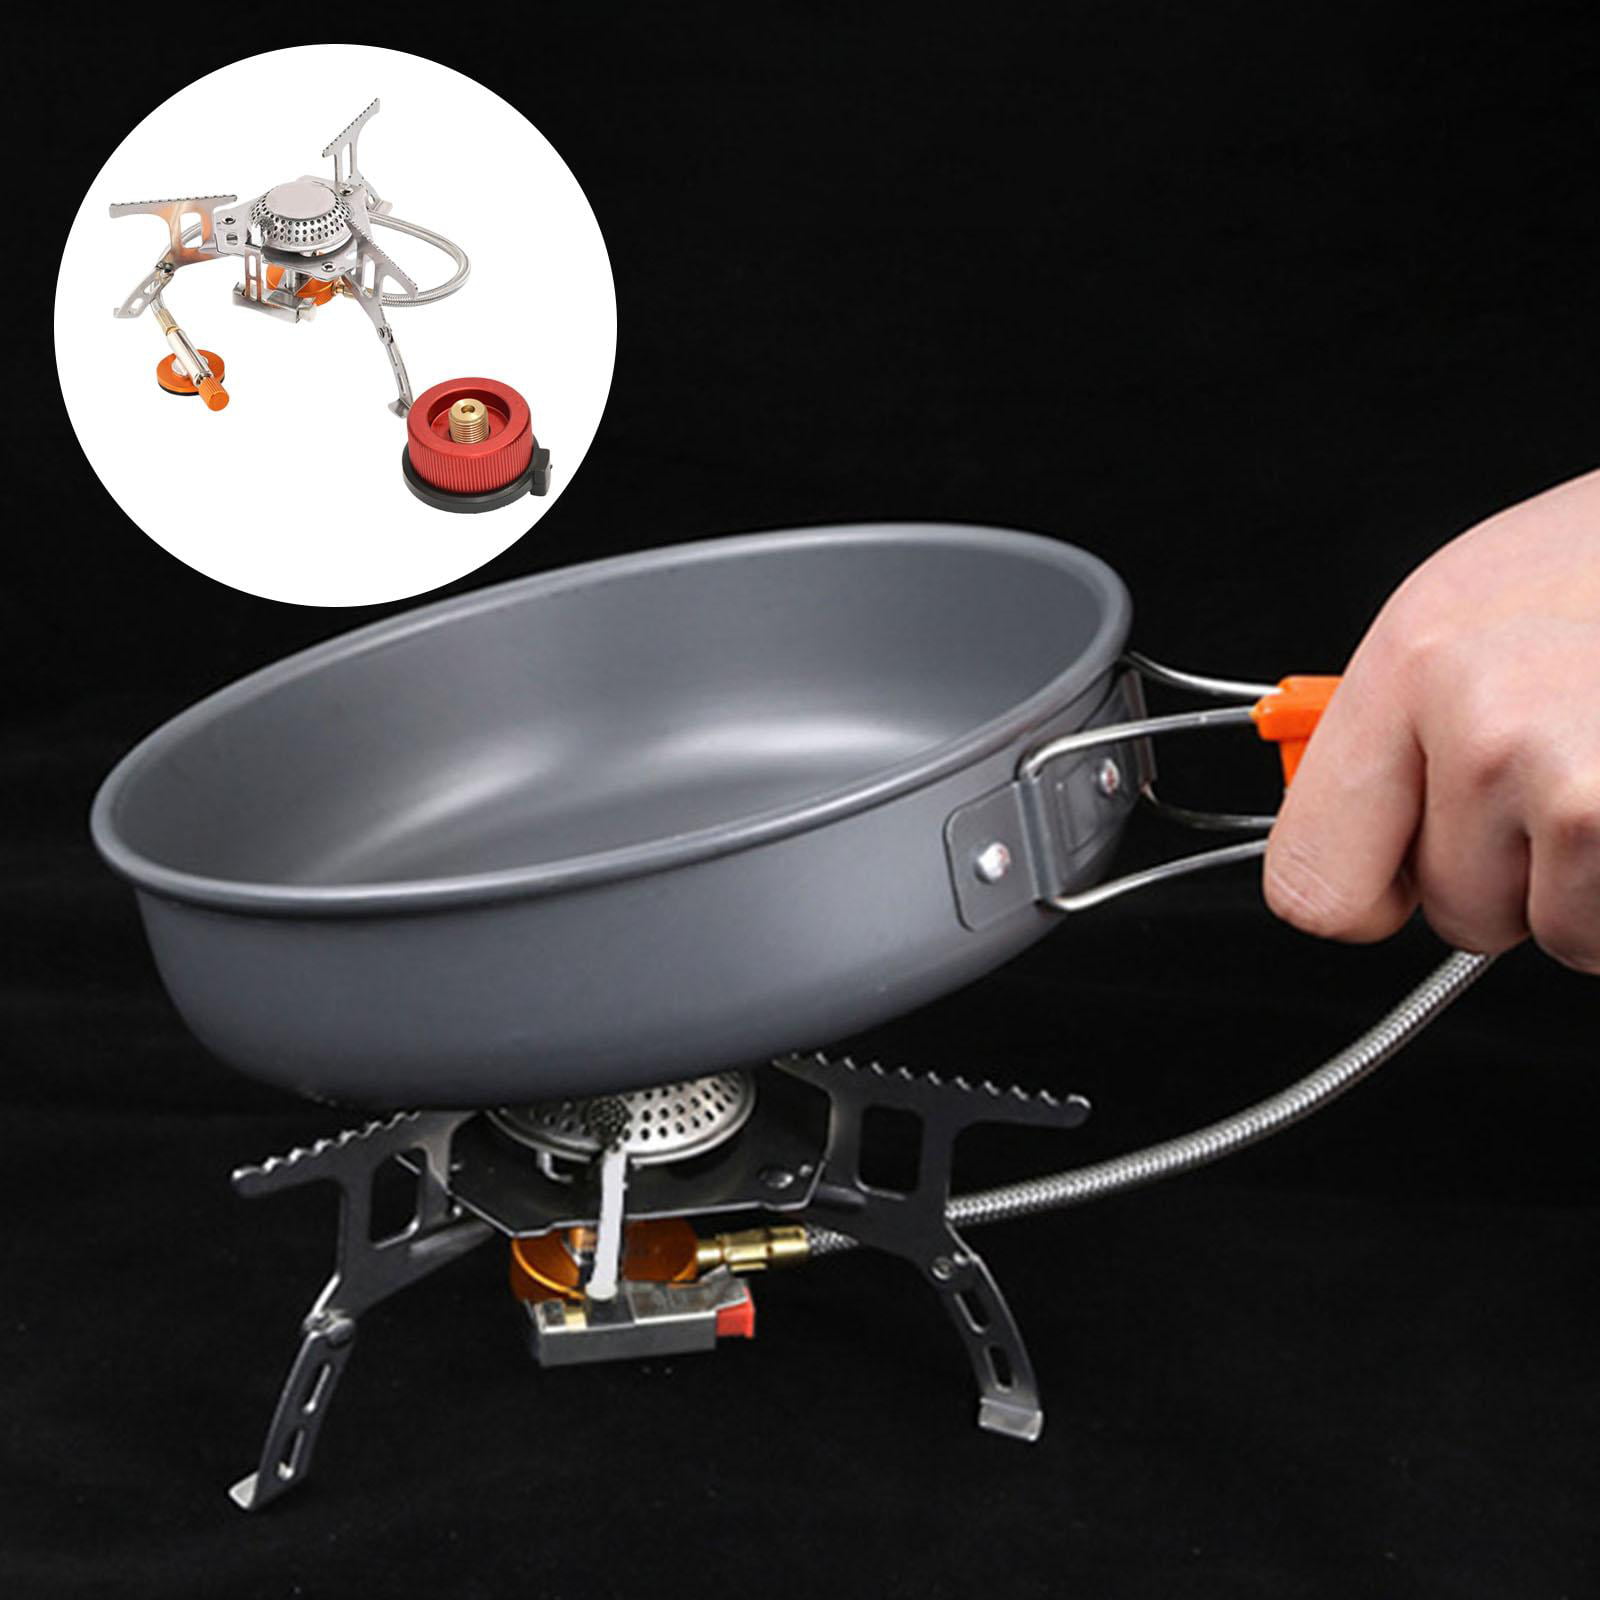 Windproof Pocket Picnic Cooking Gas Burner - Mini Ultralight Camping Stove  - China Pipe Line Gas Stove, BBQ Grill